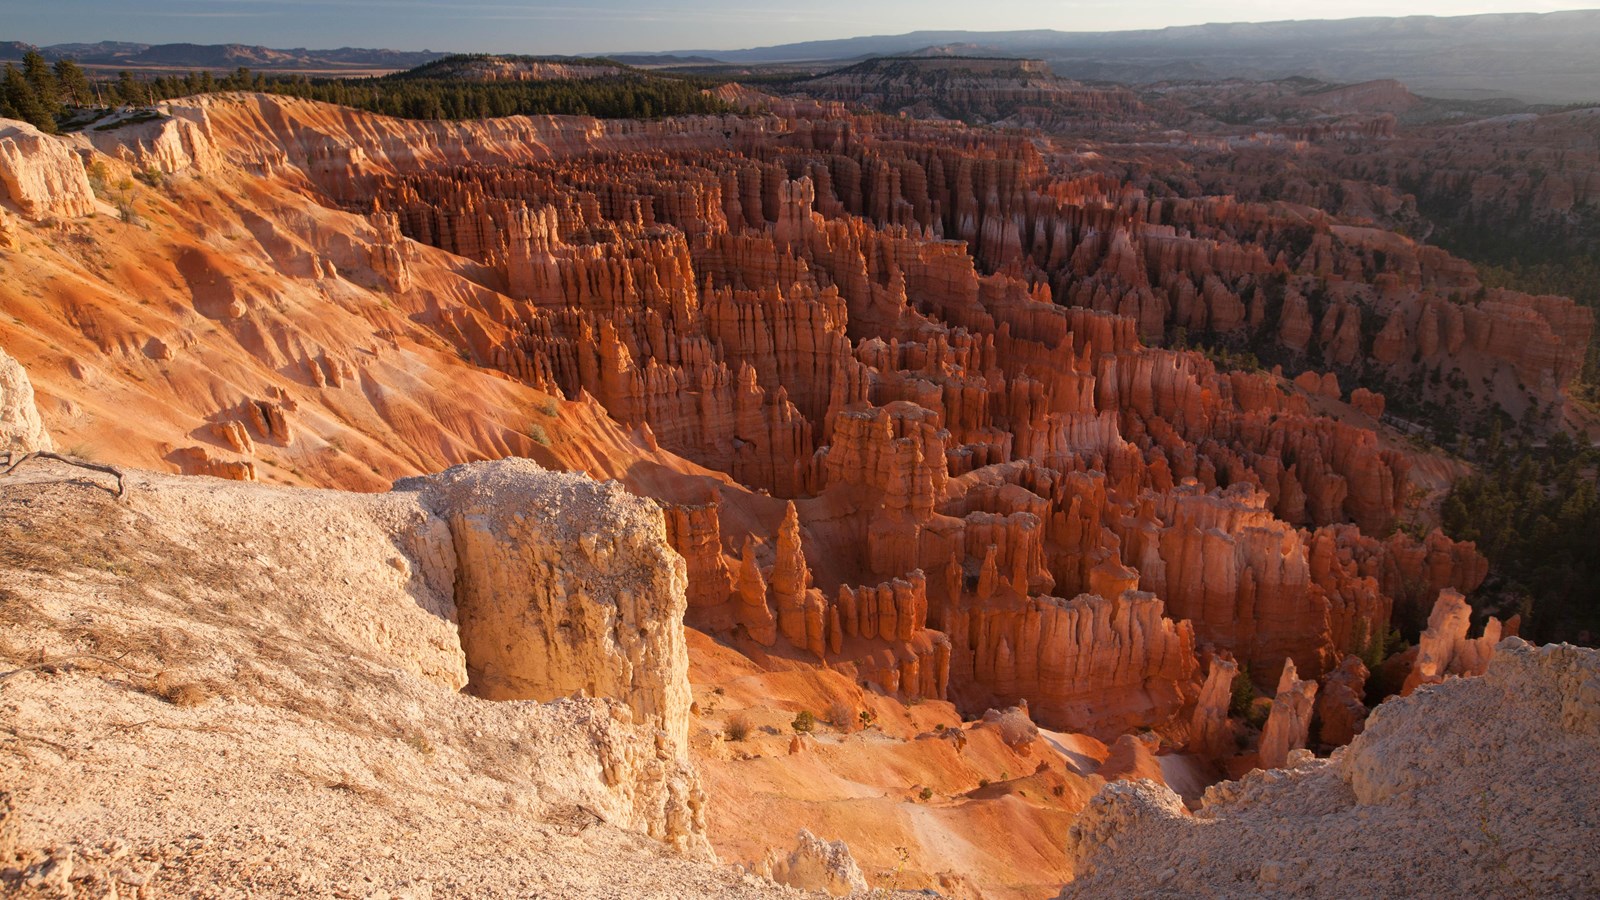 A vibrant red rock landscape of white limestone and forest below